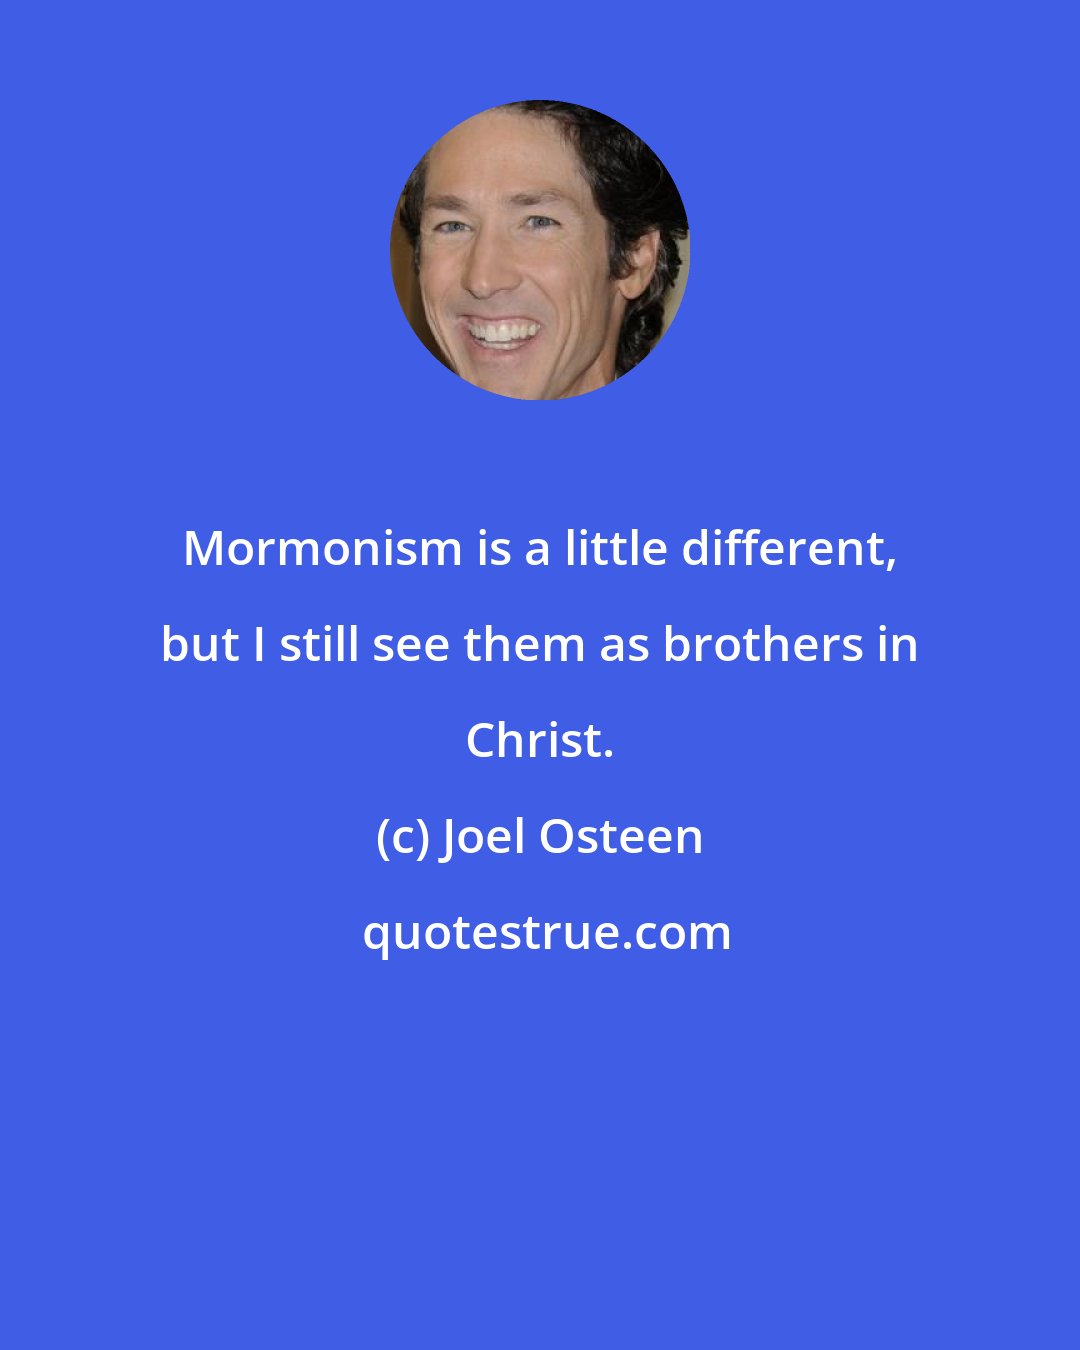 Joel Osteen: Mormonism is a little different, but I still see them as brothers in Christ.